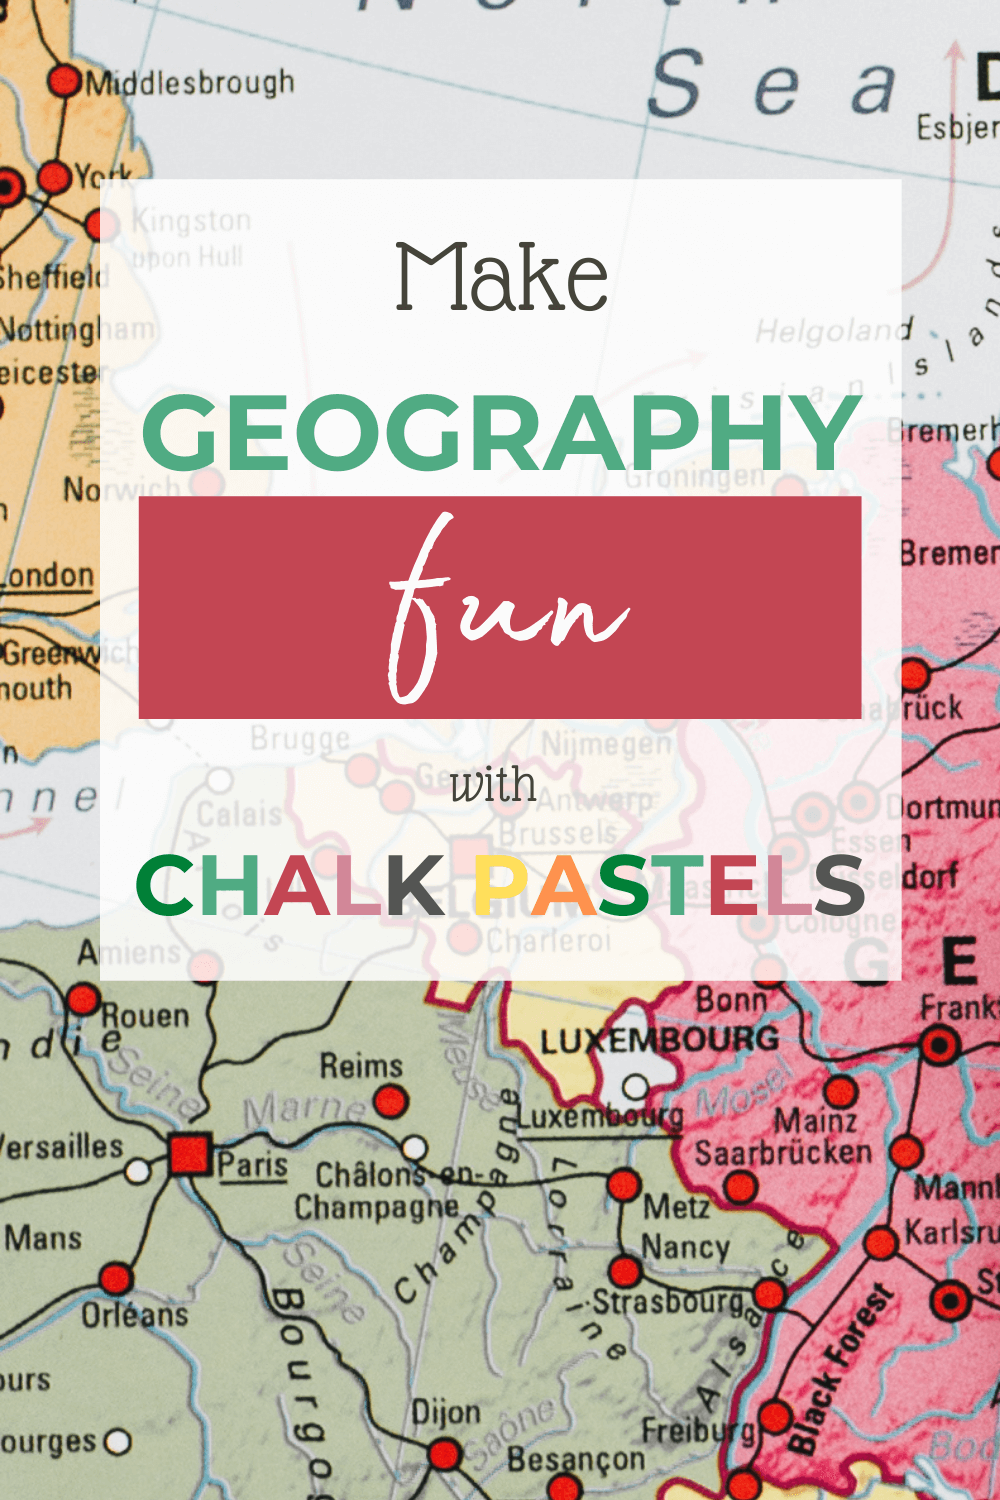 Make Homeschool Geography Fun with Chalk Pastels: Are you looking for a unique way to get your kids excited about their homeschool geography? Maybe you have a hands-on learner that just needs something a little extra for their cartography lesson. Now you can make geography fun with chalk pastels! #homeschoolgeography #geography #chalkpastels #chalkpastelart #chalkpastelgeography #chalkpastelmaps #homeschoolart 